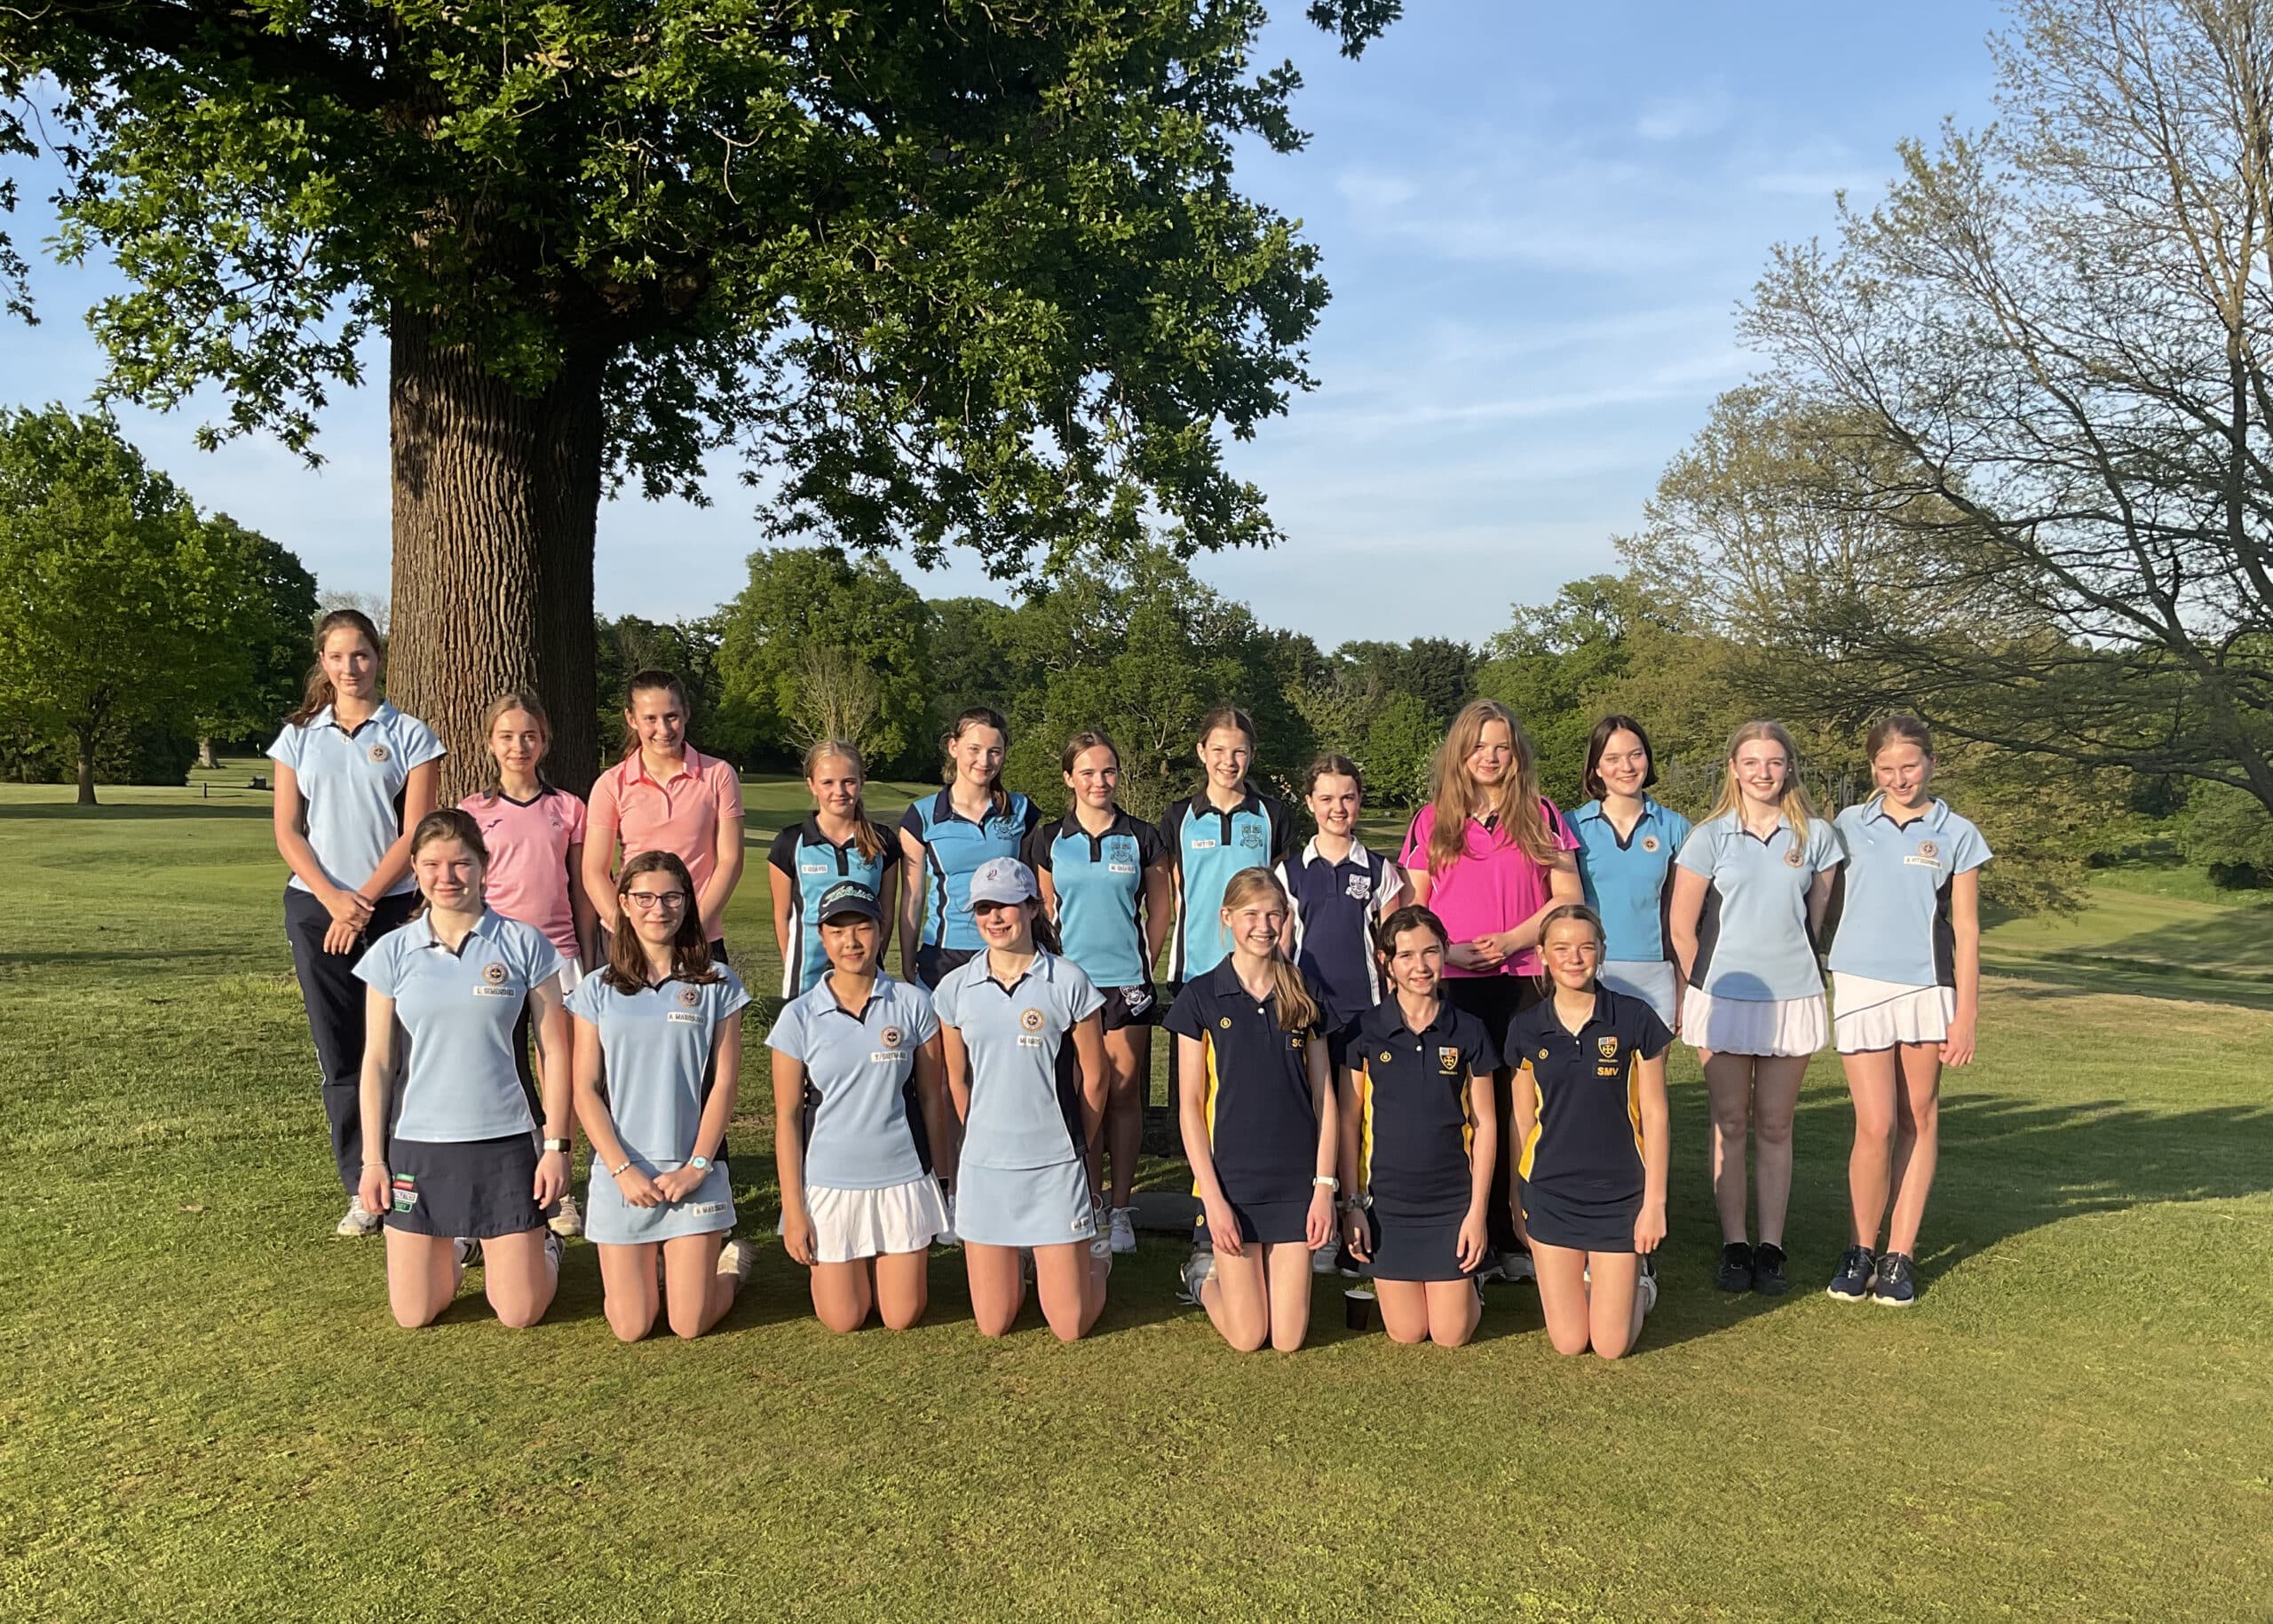 Cranleigh become runners up at the Girls Golf Invitation Annual tournament.